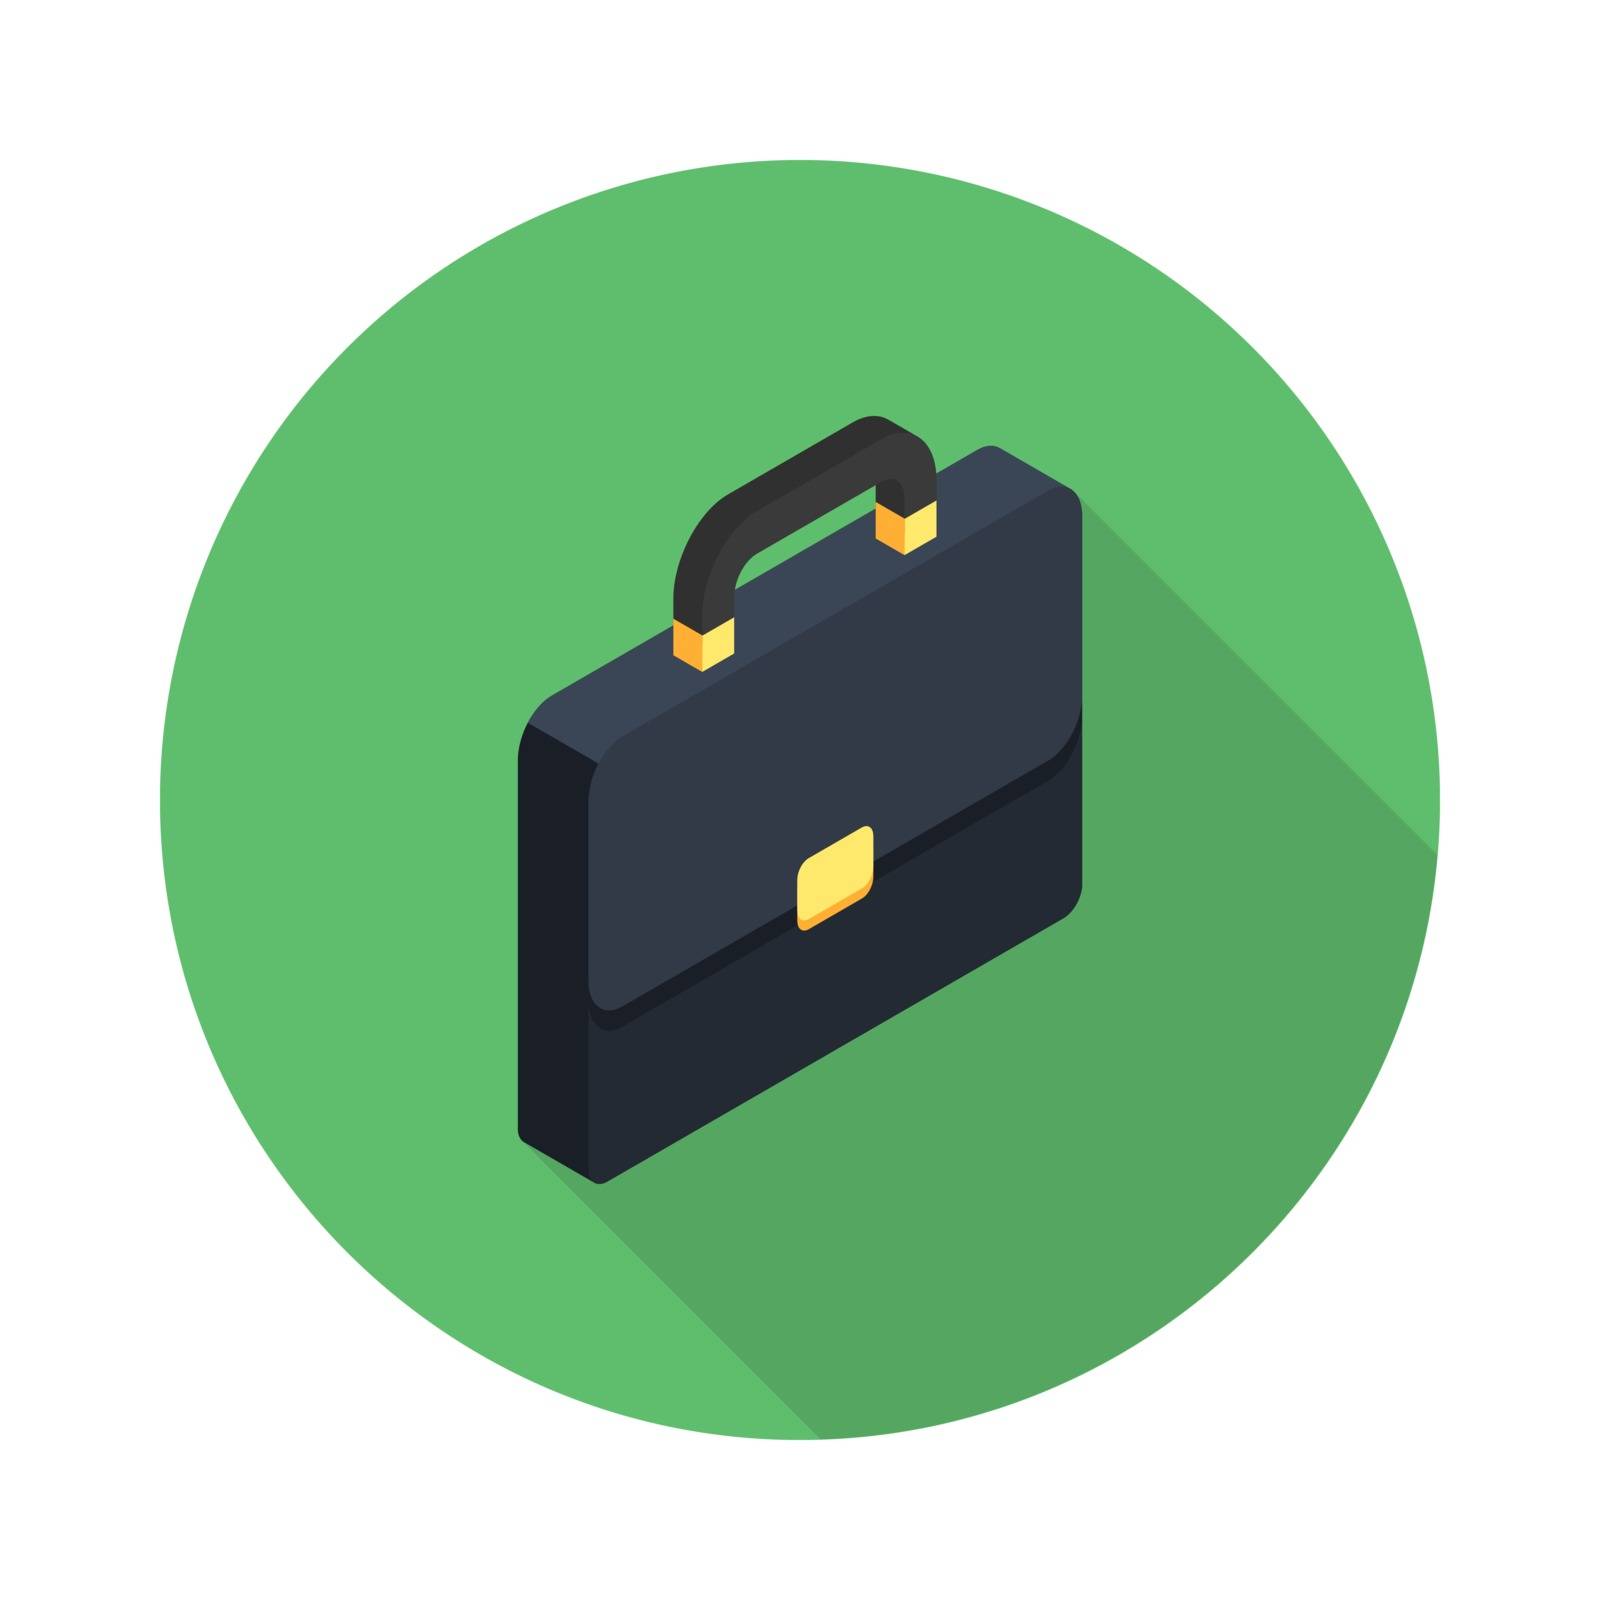 Briefcase right view icon vector isometric. Flat style vector illustration.